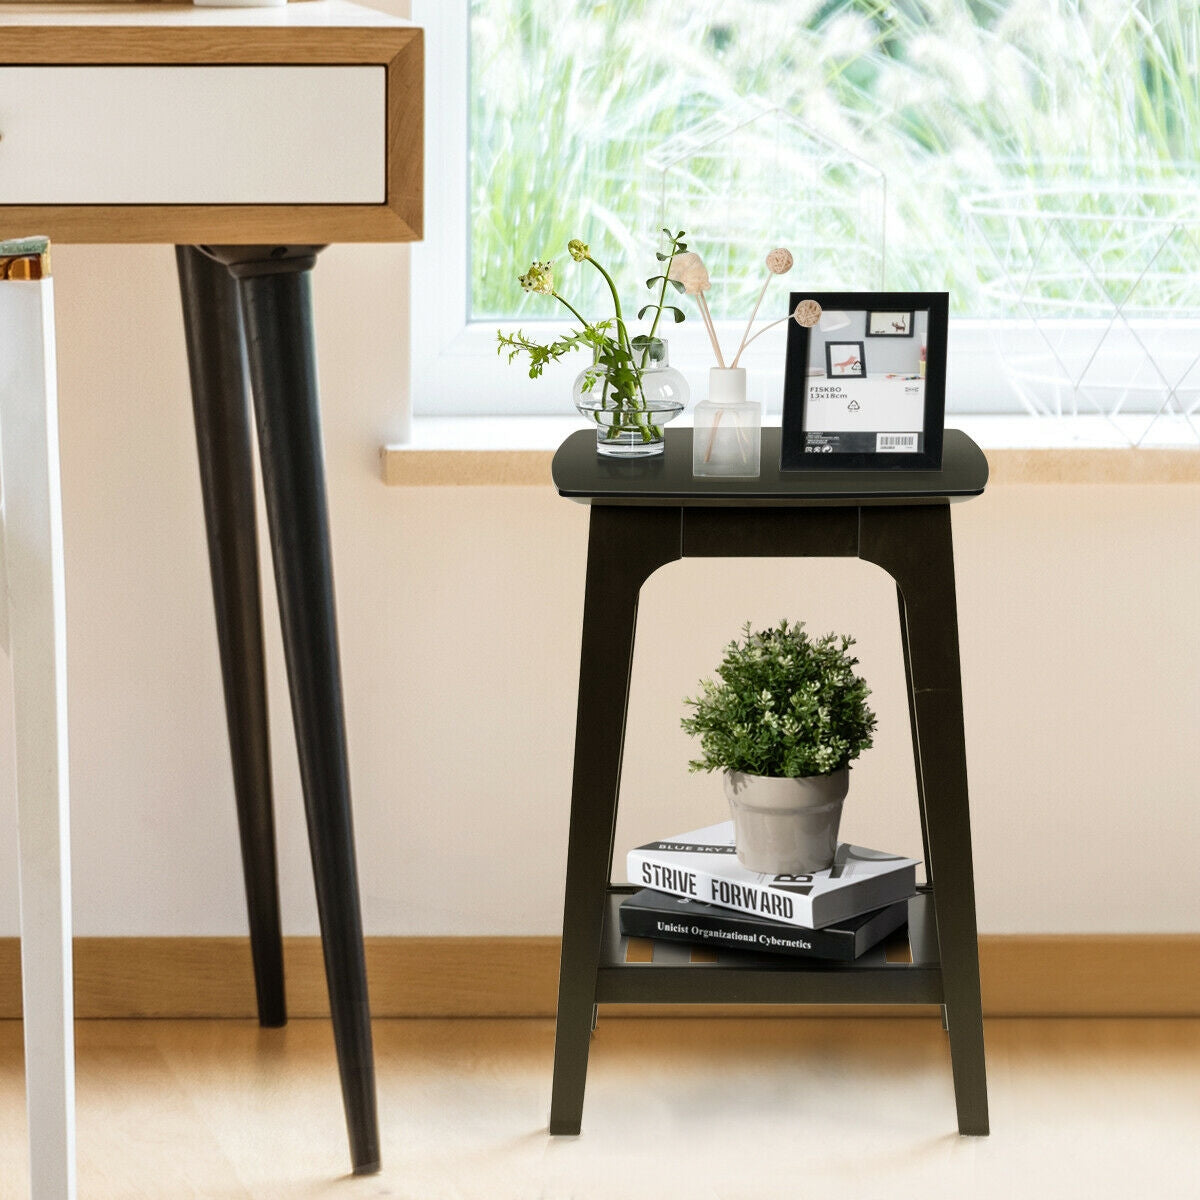 Set of 2 Side End Tables with Lower Storage Shelf-Black - Scarvesnthangs